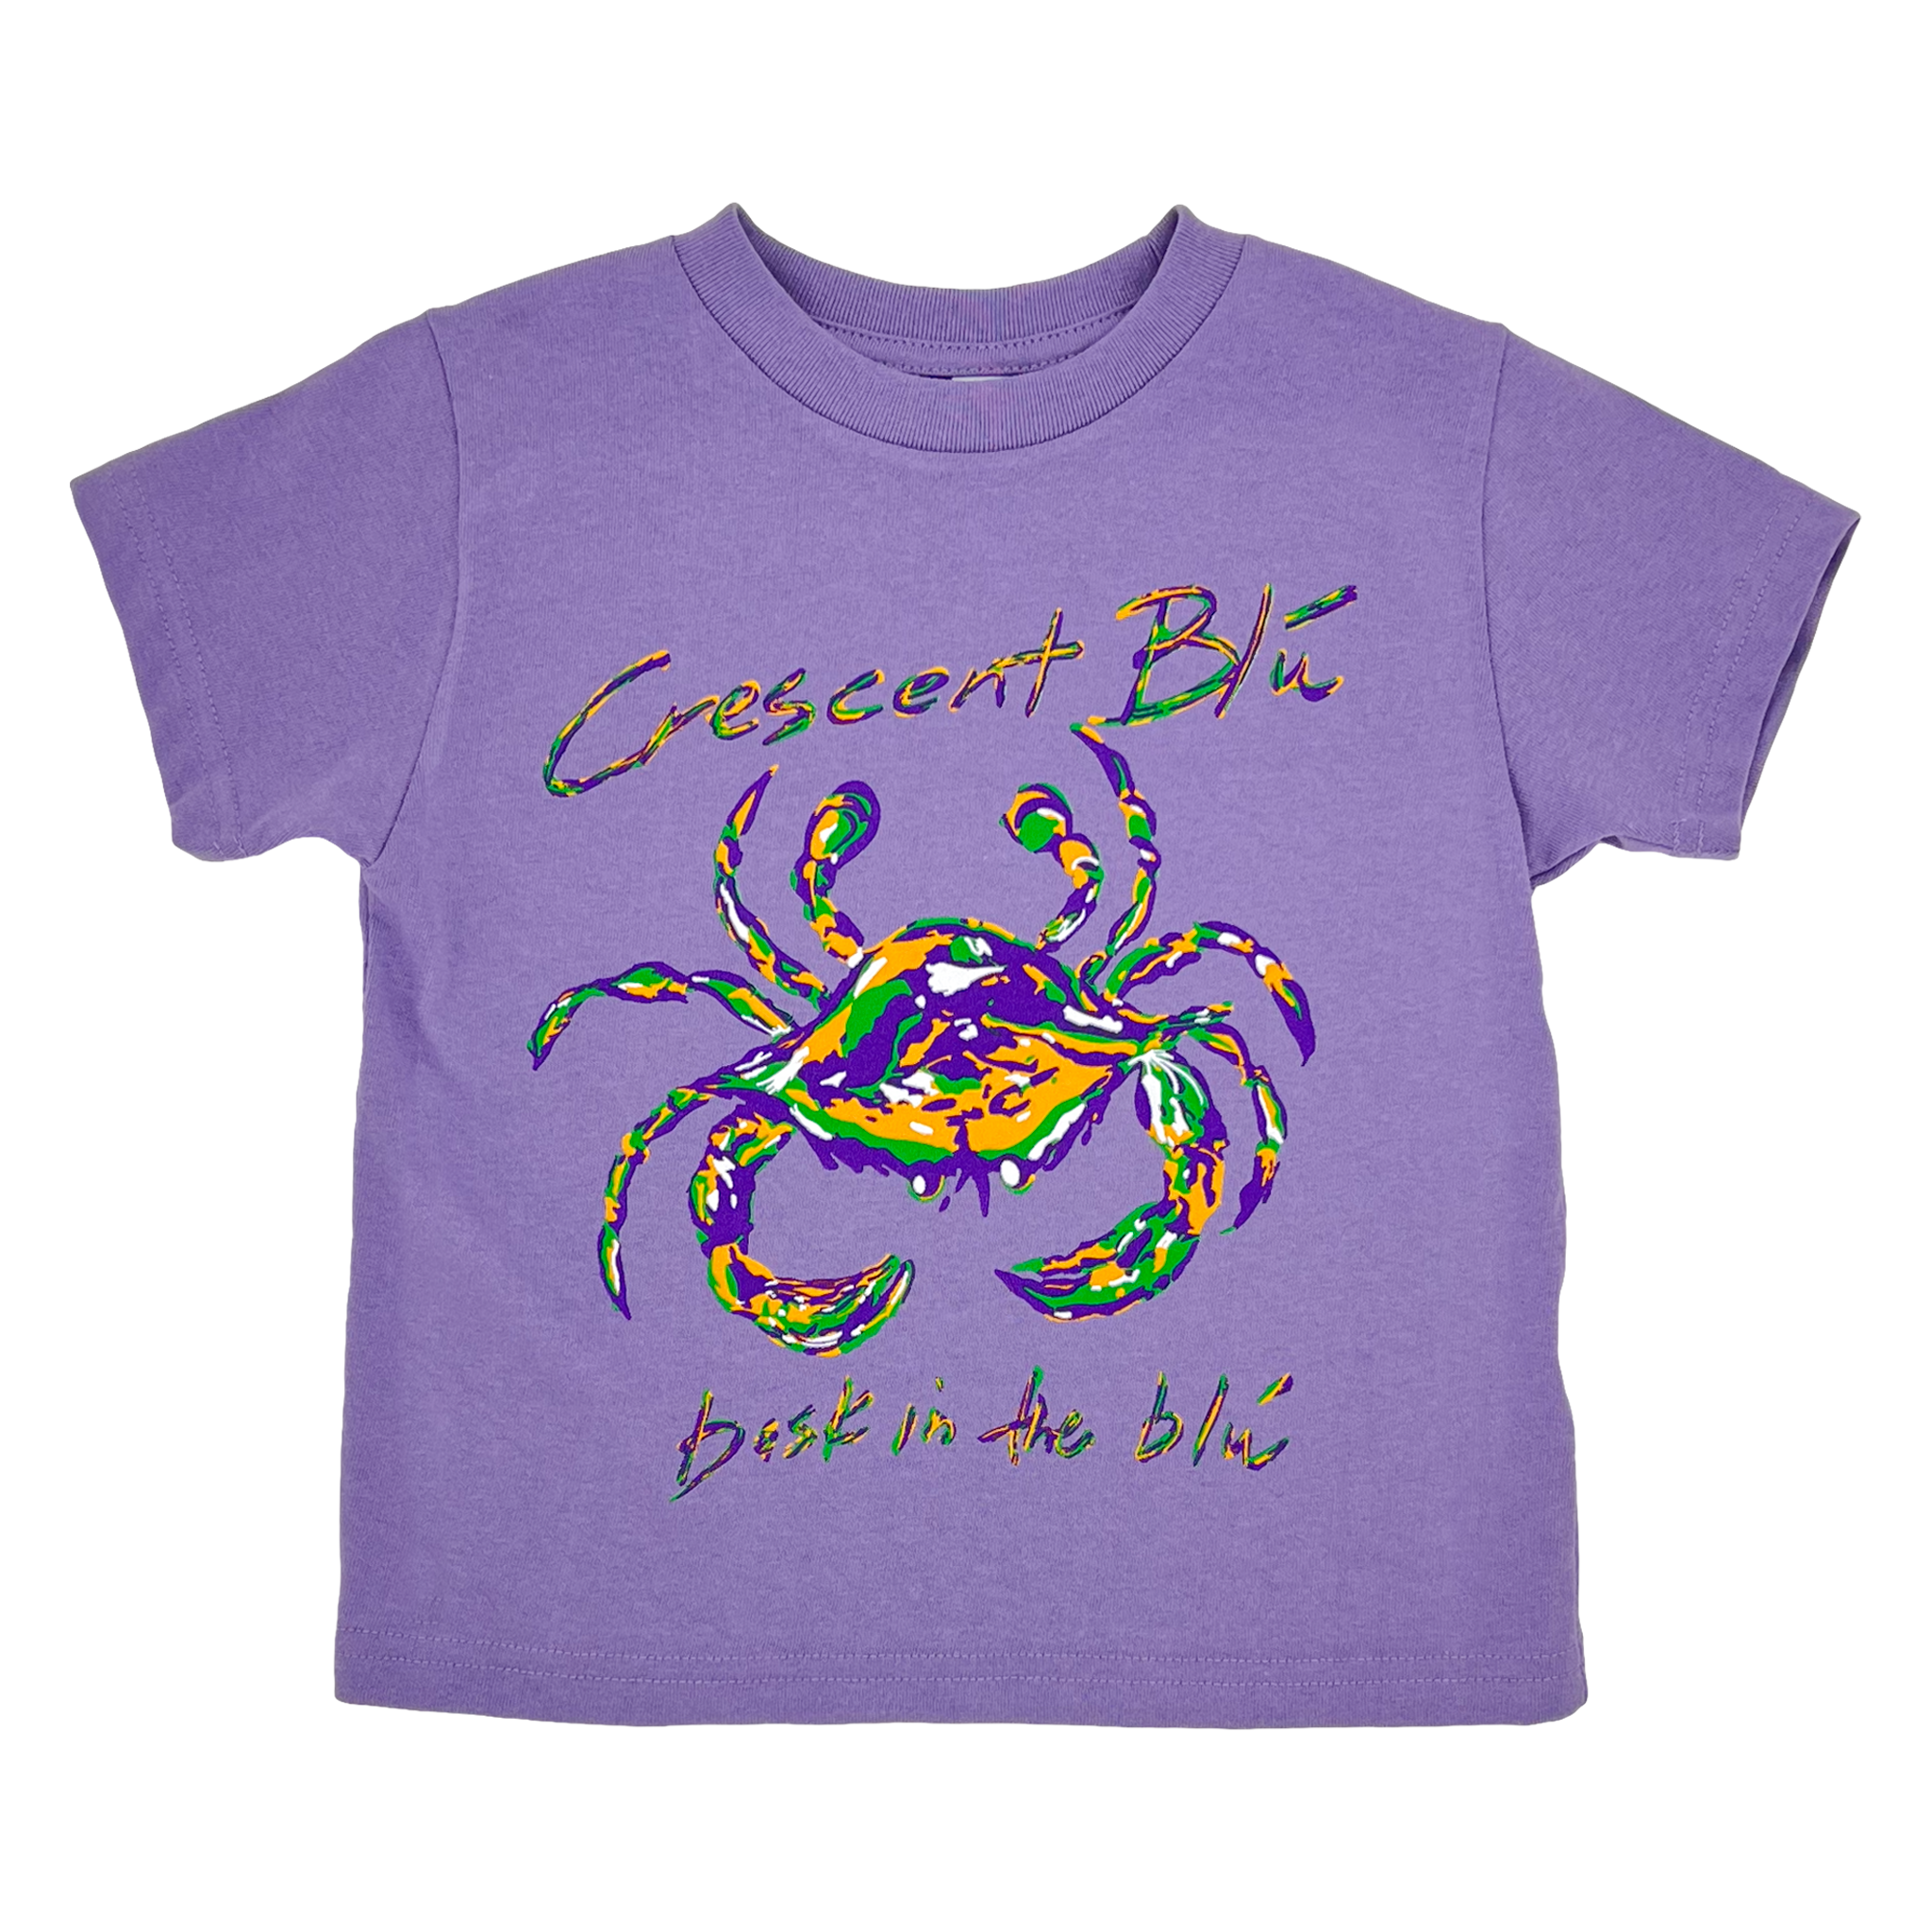 A Mardi Gras colored Crescent Bú crab on the front of a toddler sized lavender t-shirt. Bask in the Blu is written under the crab. 